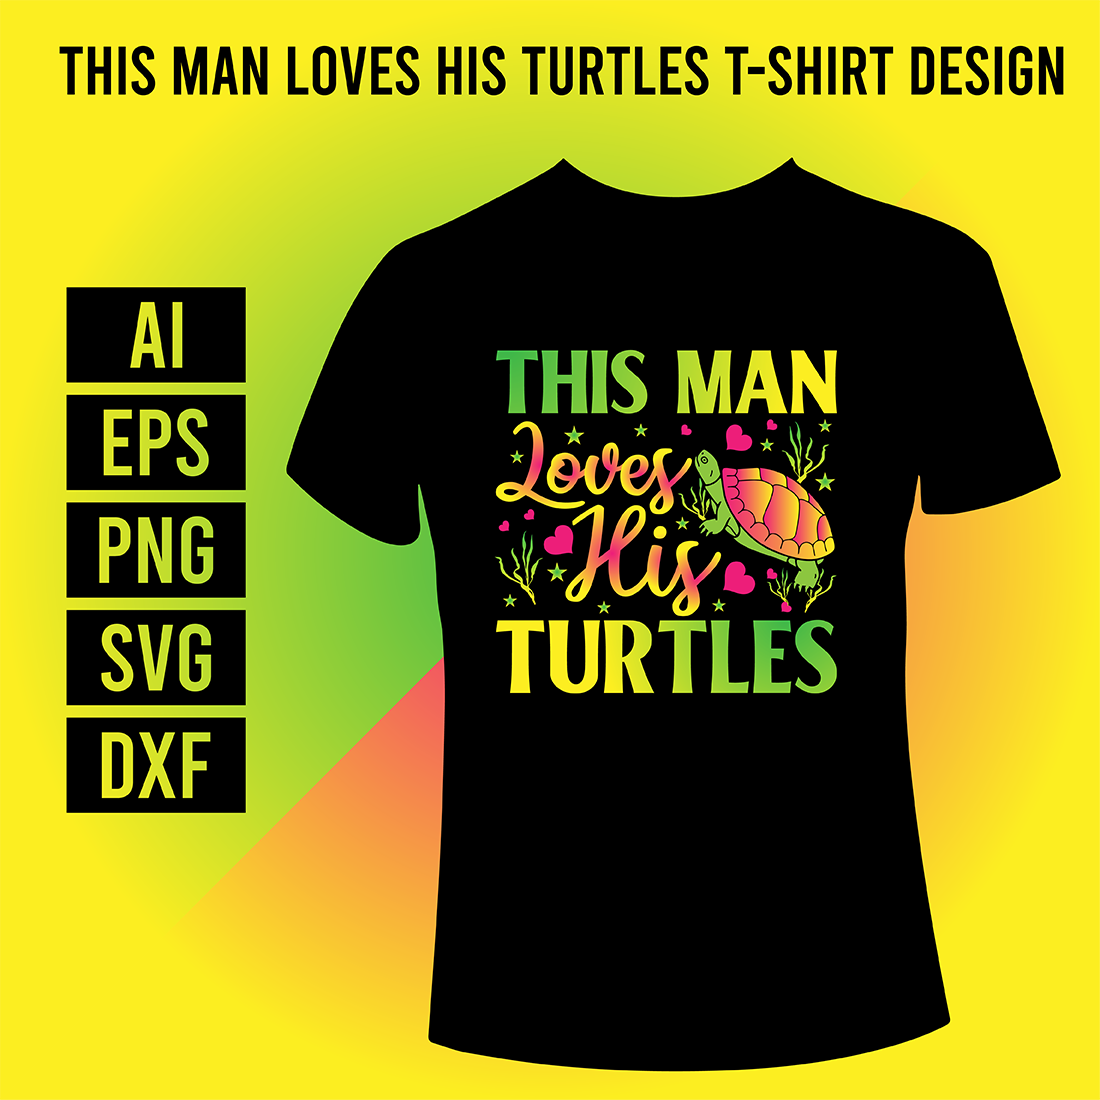 This Man Loves His Turtles T-Shirt Design cover image.